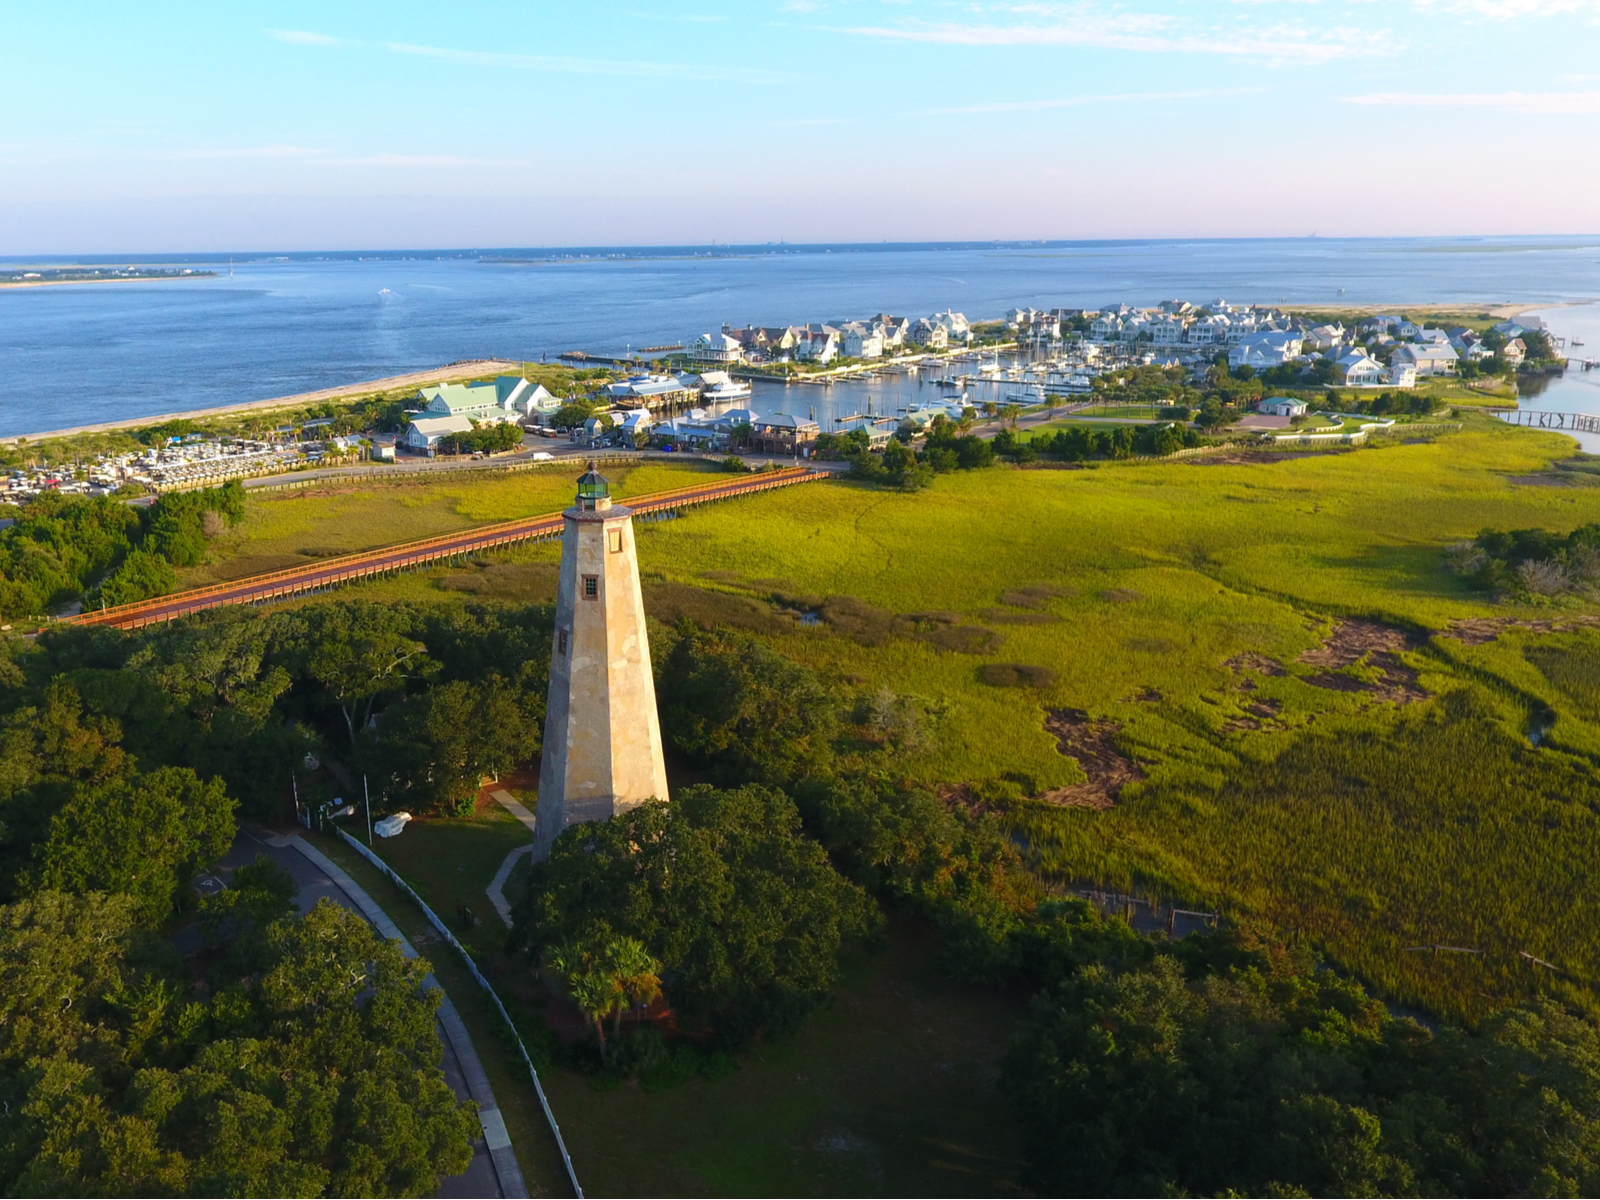 Aerial view of our top pick for the best places to visit in North Carolina, Bald Head Island